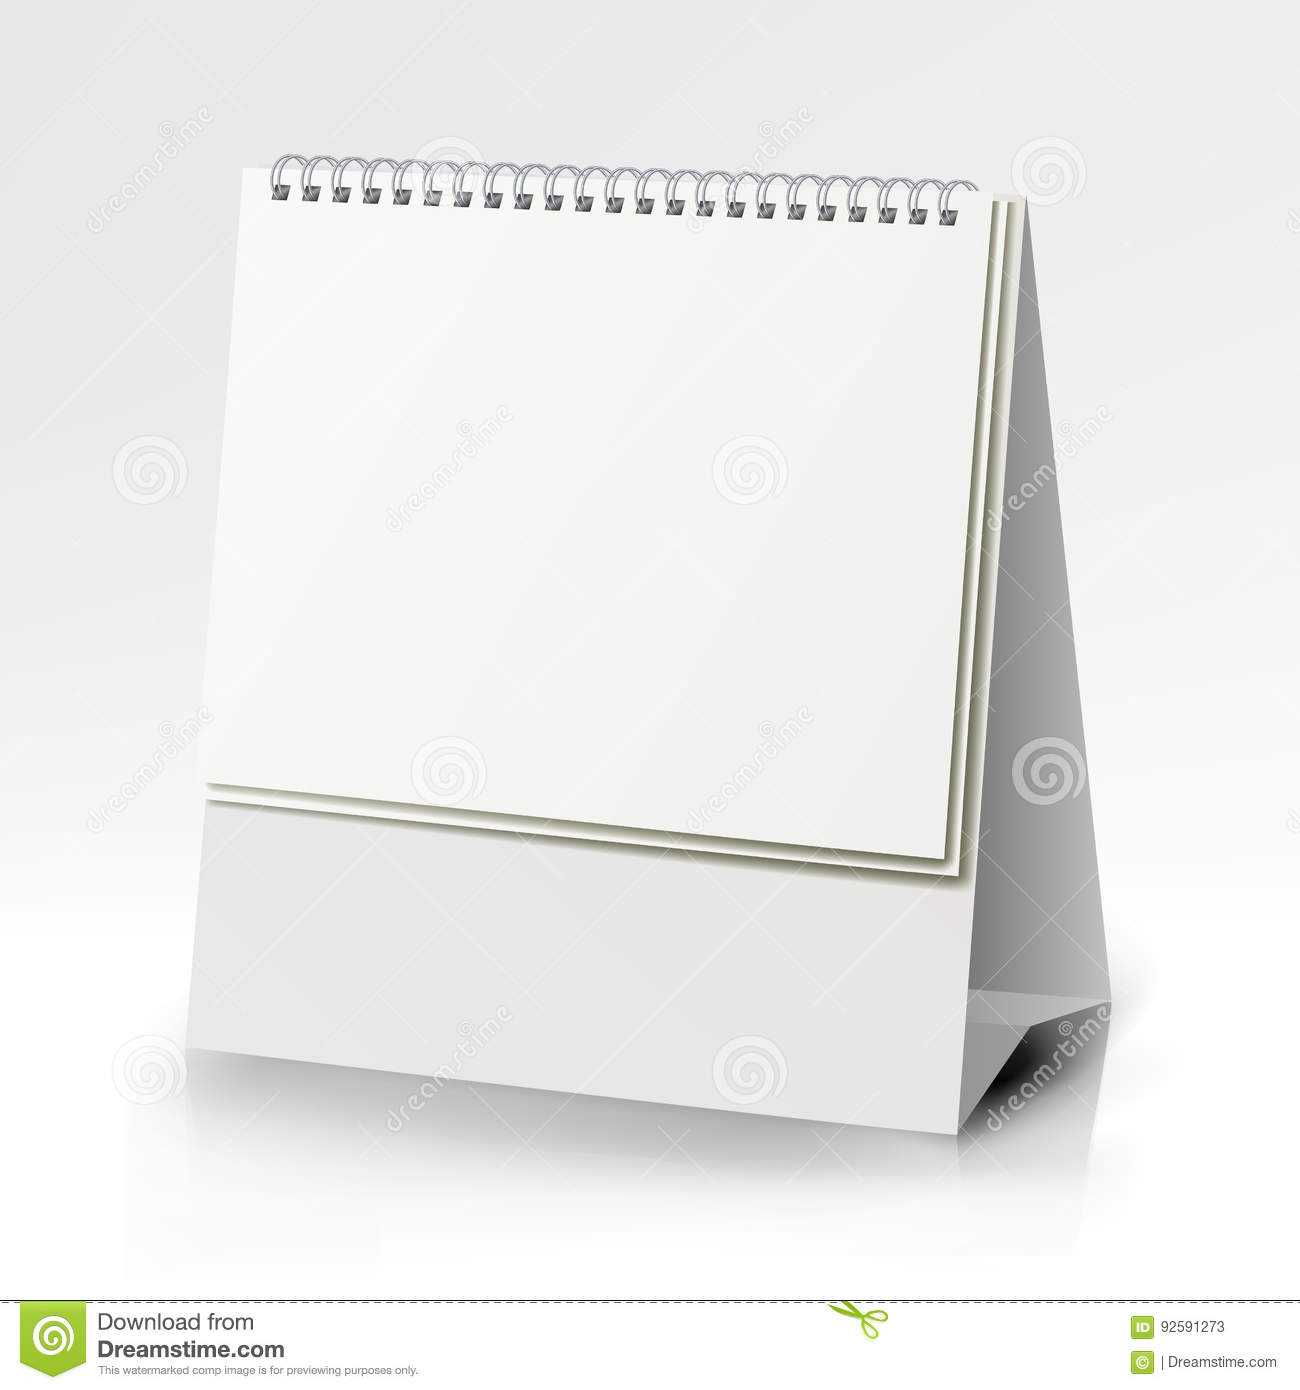 Spiral Calendar Vector. Table Blank Stand Holder For Menu With Card Stand Template